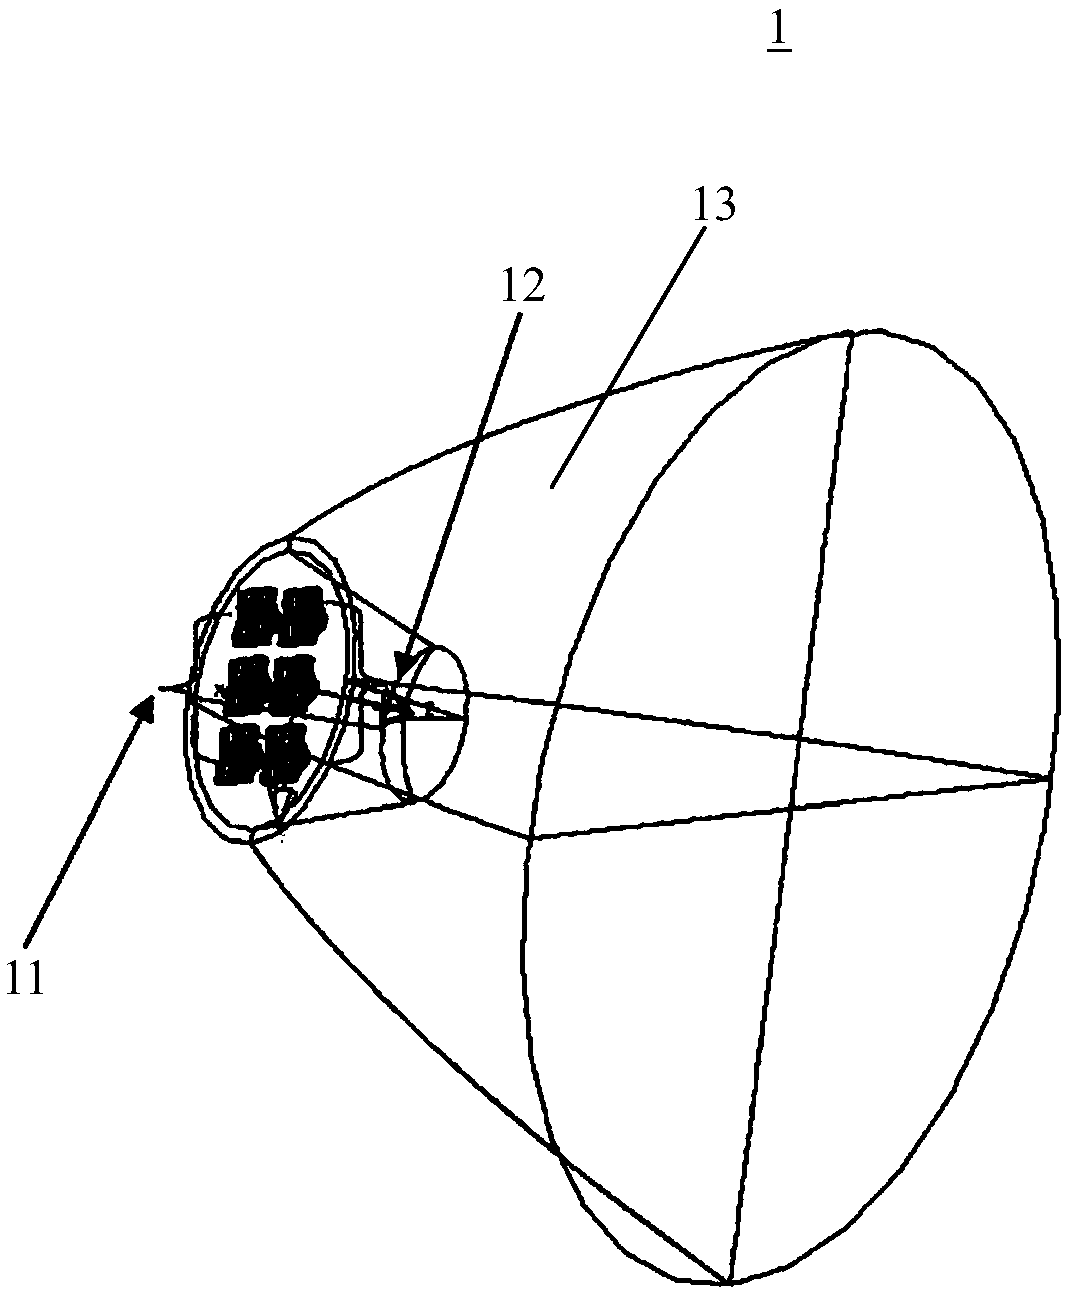 Lens, lens array and lighting device